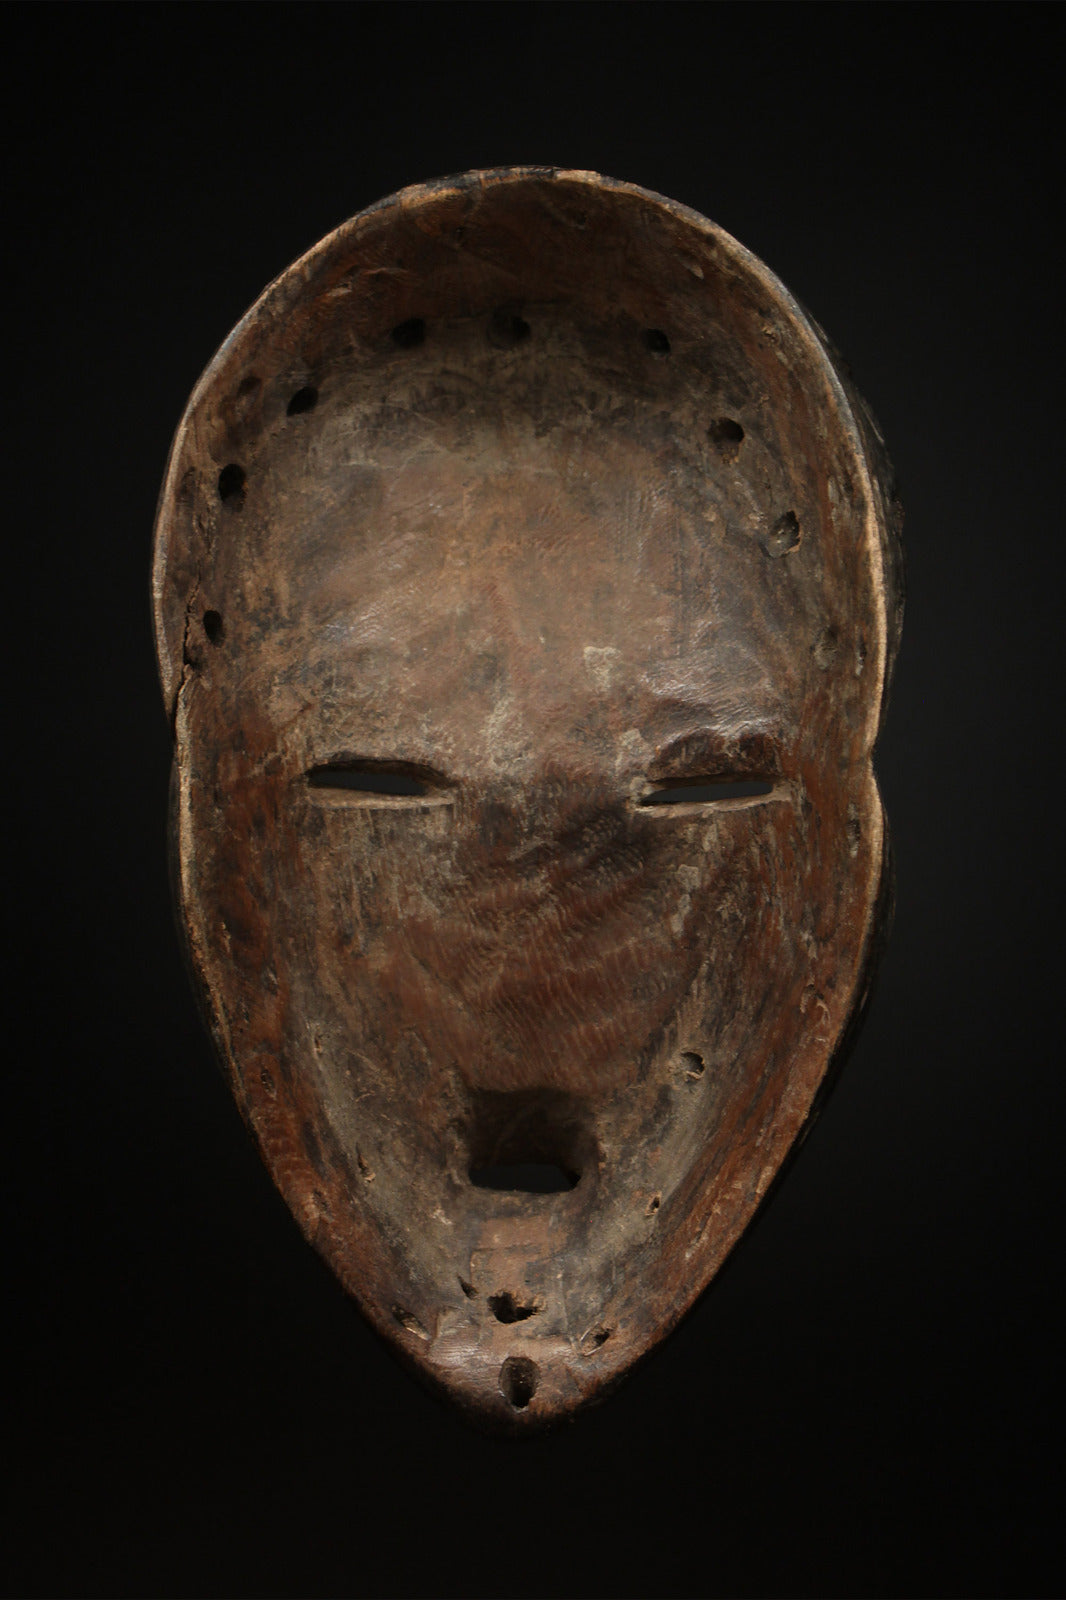 Tribal Masks - Traditional - Folk Art - African - Objects - Artifacts - Sculptures - Collectible - Cultural Sophistication - Home - Intricately - Carved Wooden Deangle Mask - Dan Tribe - Ivory Coast - Handcrafted Wood - Unique Beauty - Decor - Authentic - Statement